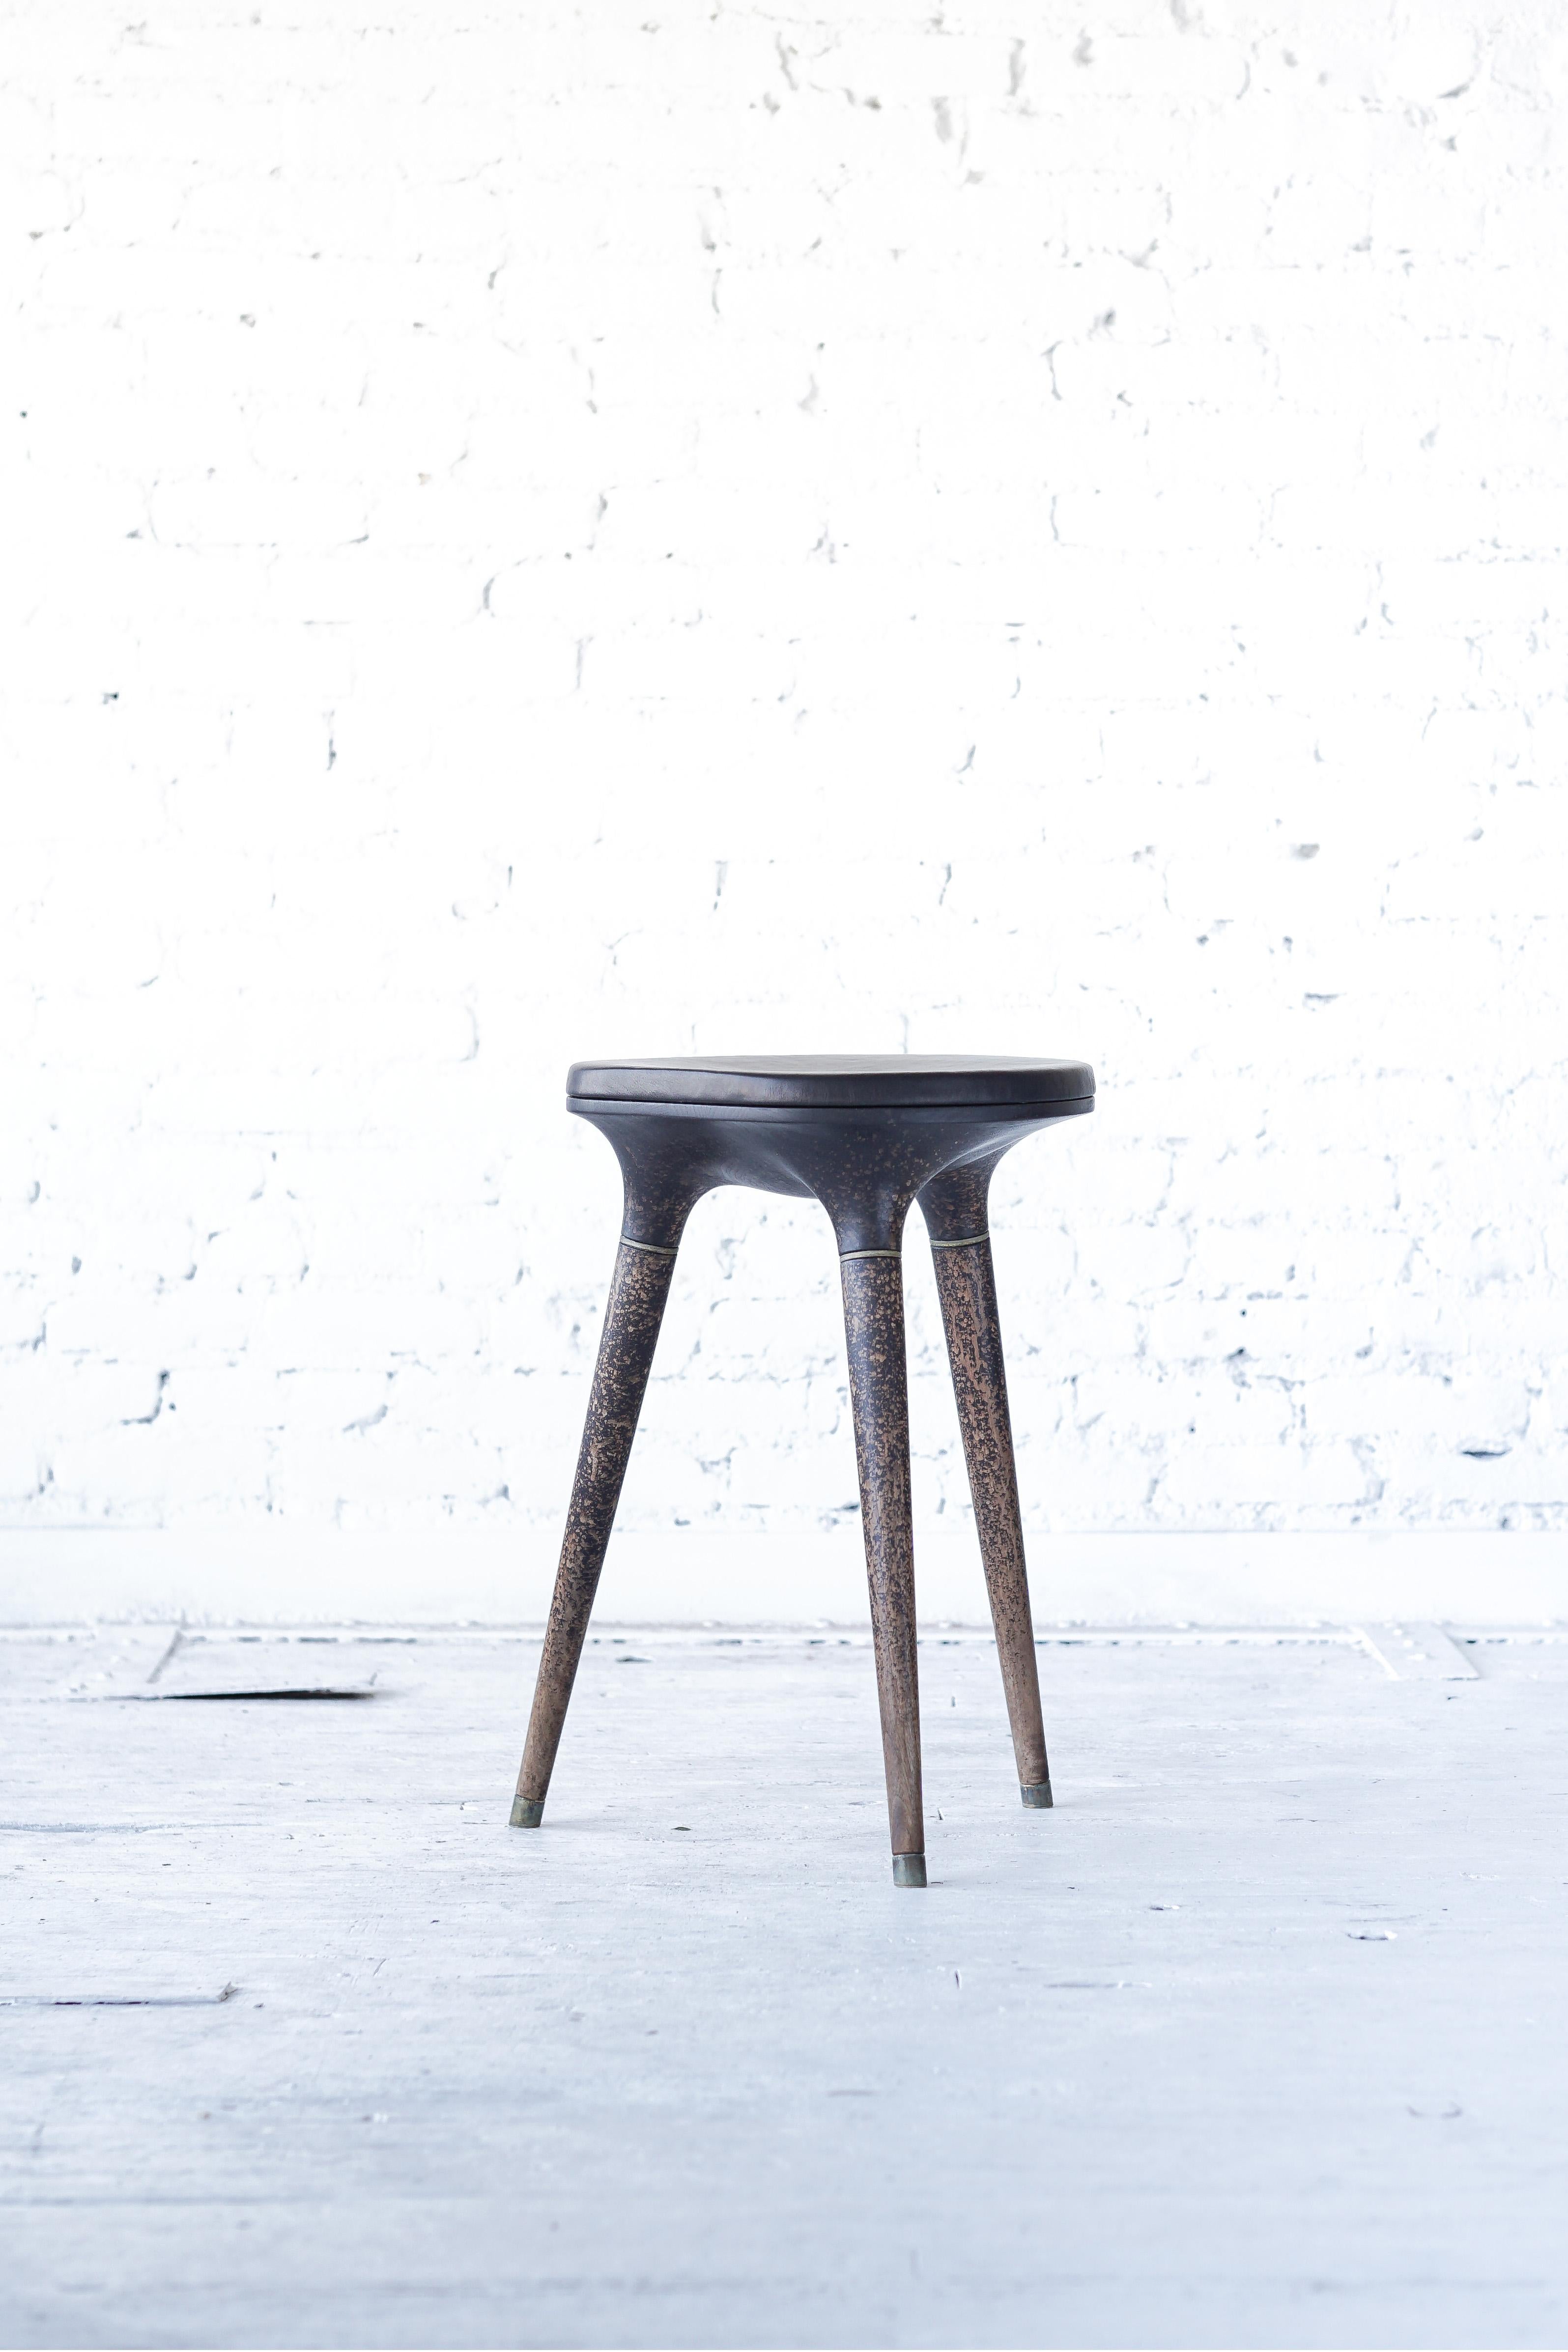 Limited edition custom Ombre finish stool 001 from Series 001 by Vincent Pocsik.

Carved walnut stool with leather cushion top and brass accents. Shown here at counter height. 

Vincent Pocsik finds the balance between old and new fabrication